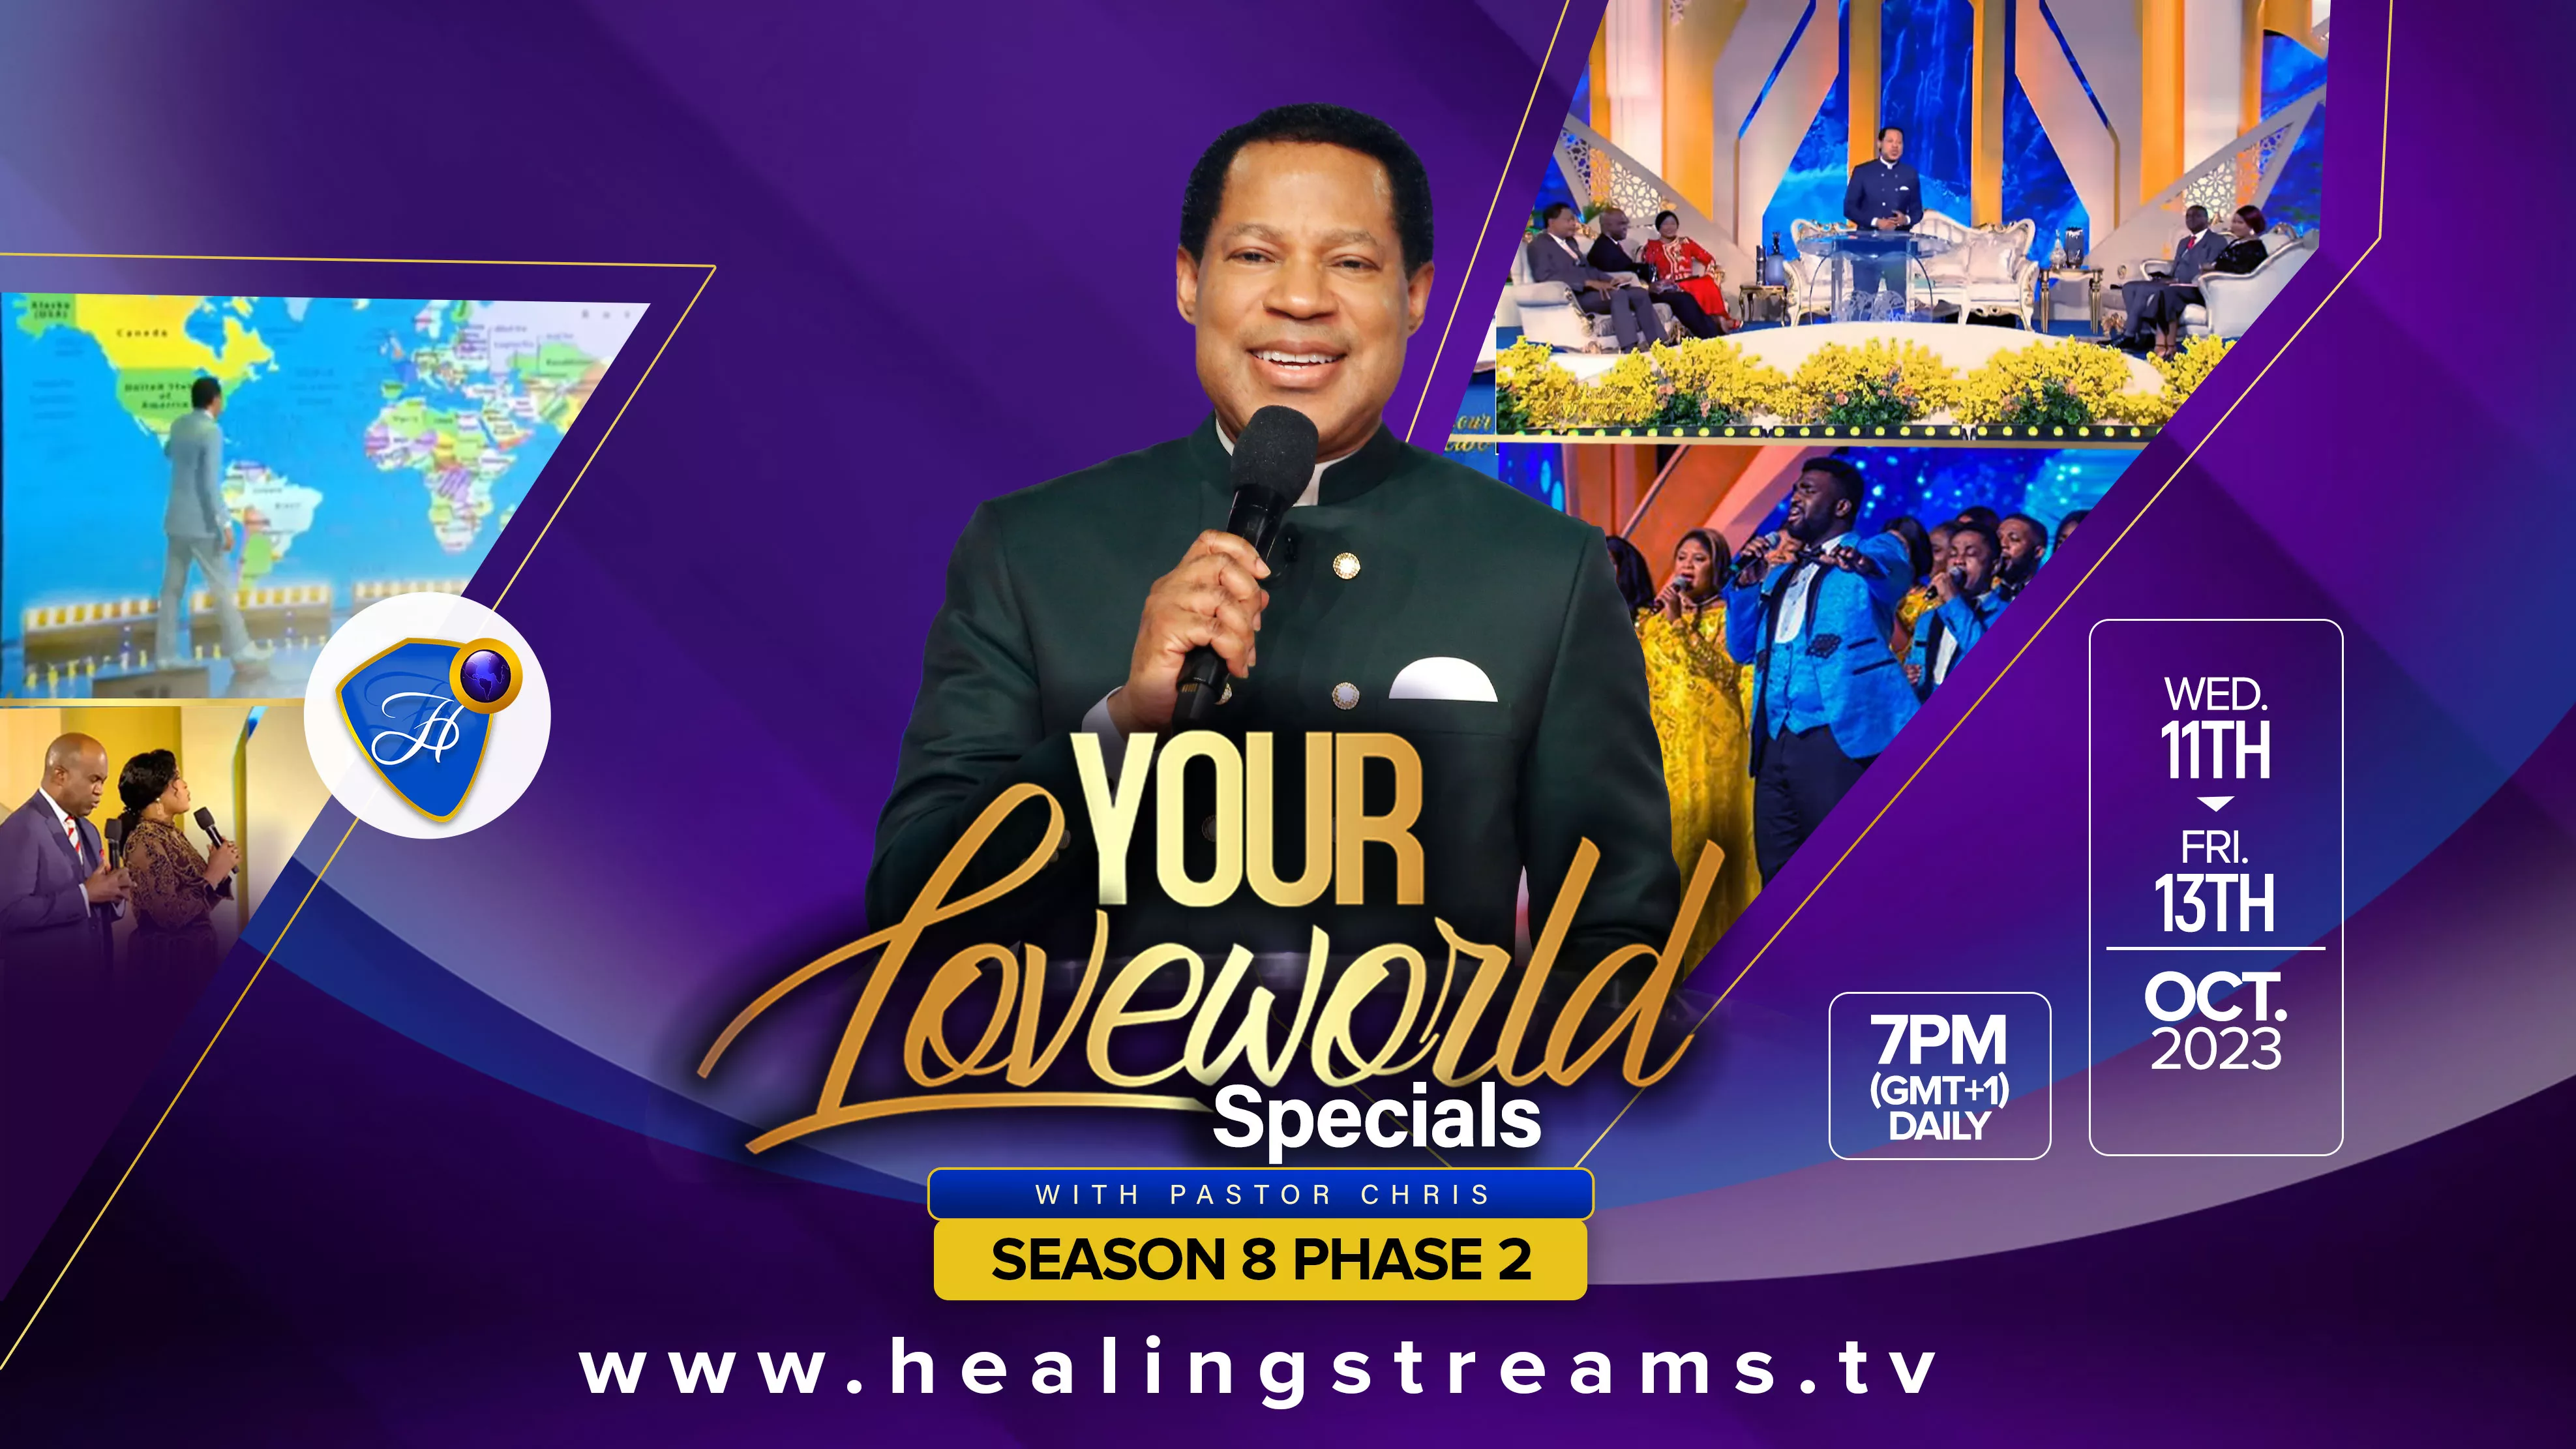 YOUR LOVEWORLD SPECIALS - A TIME OF DIVINE INSIGHT